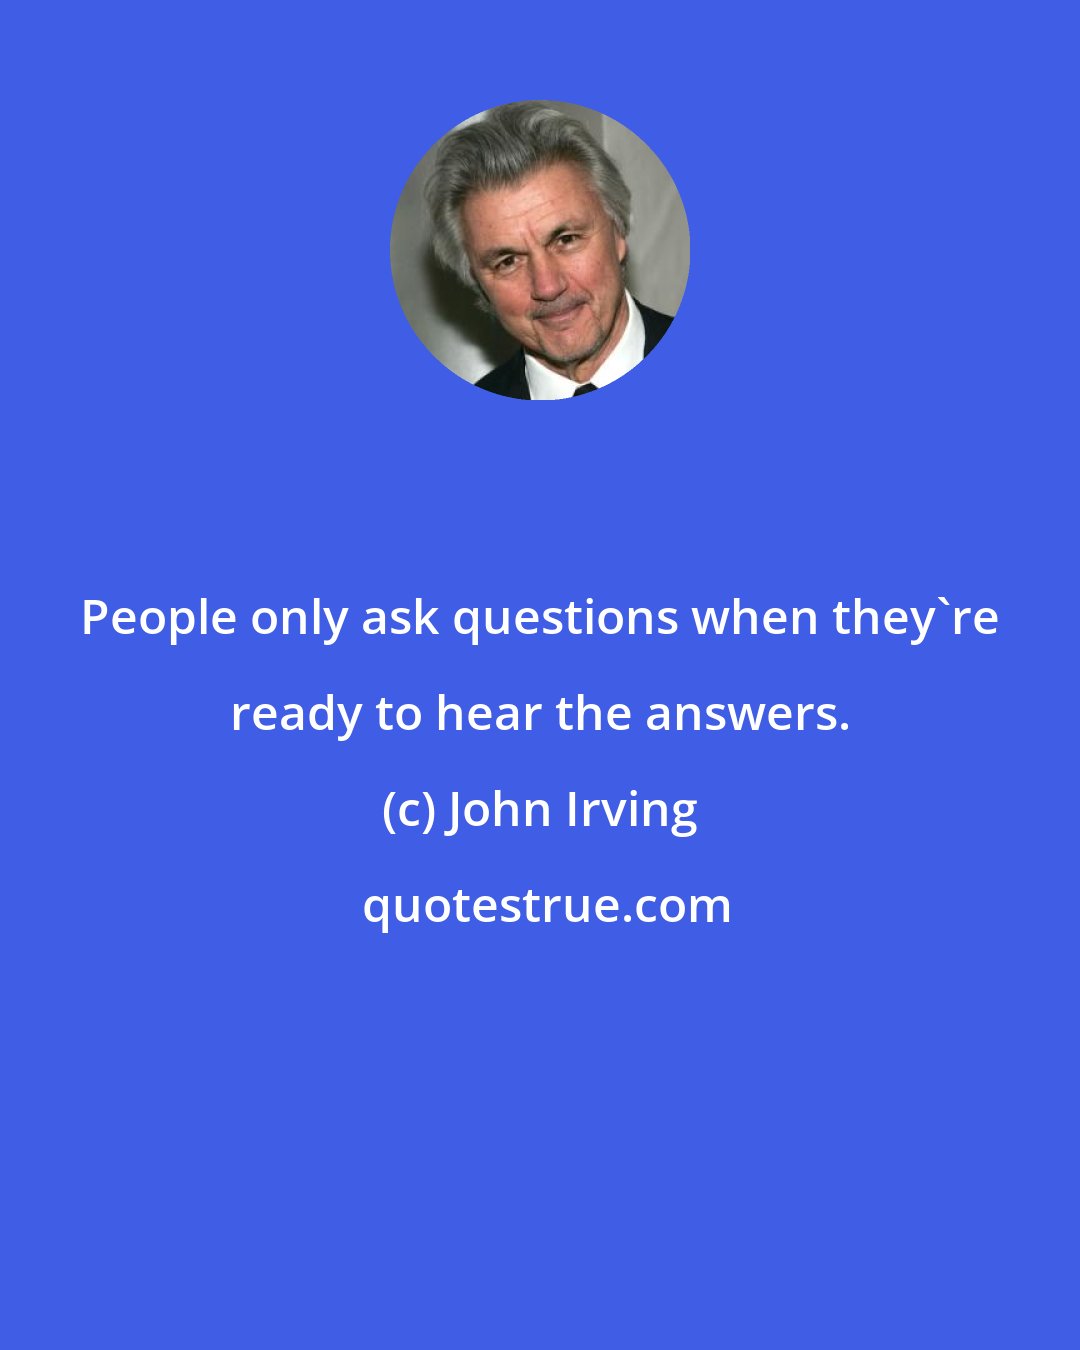 John Irving: People only ask questions when they're ready to hear the answers.